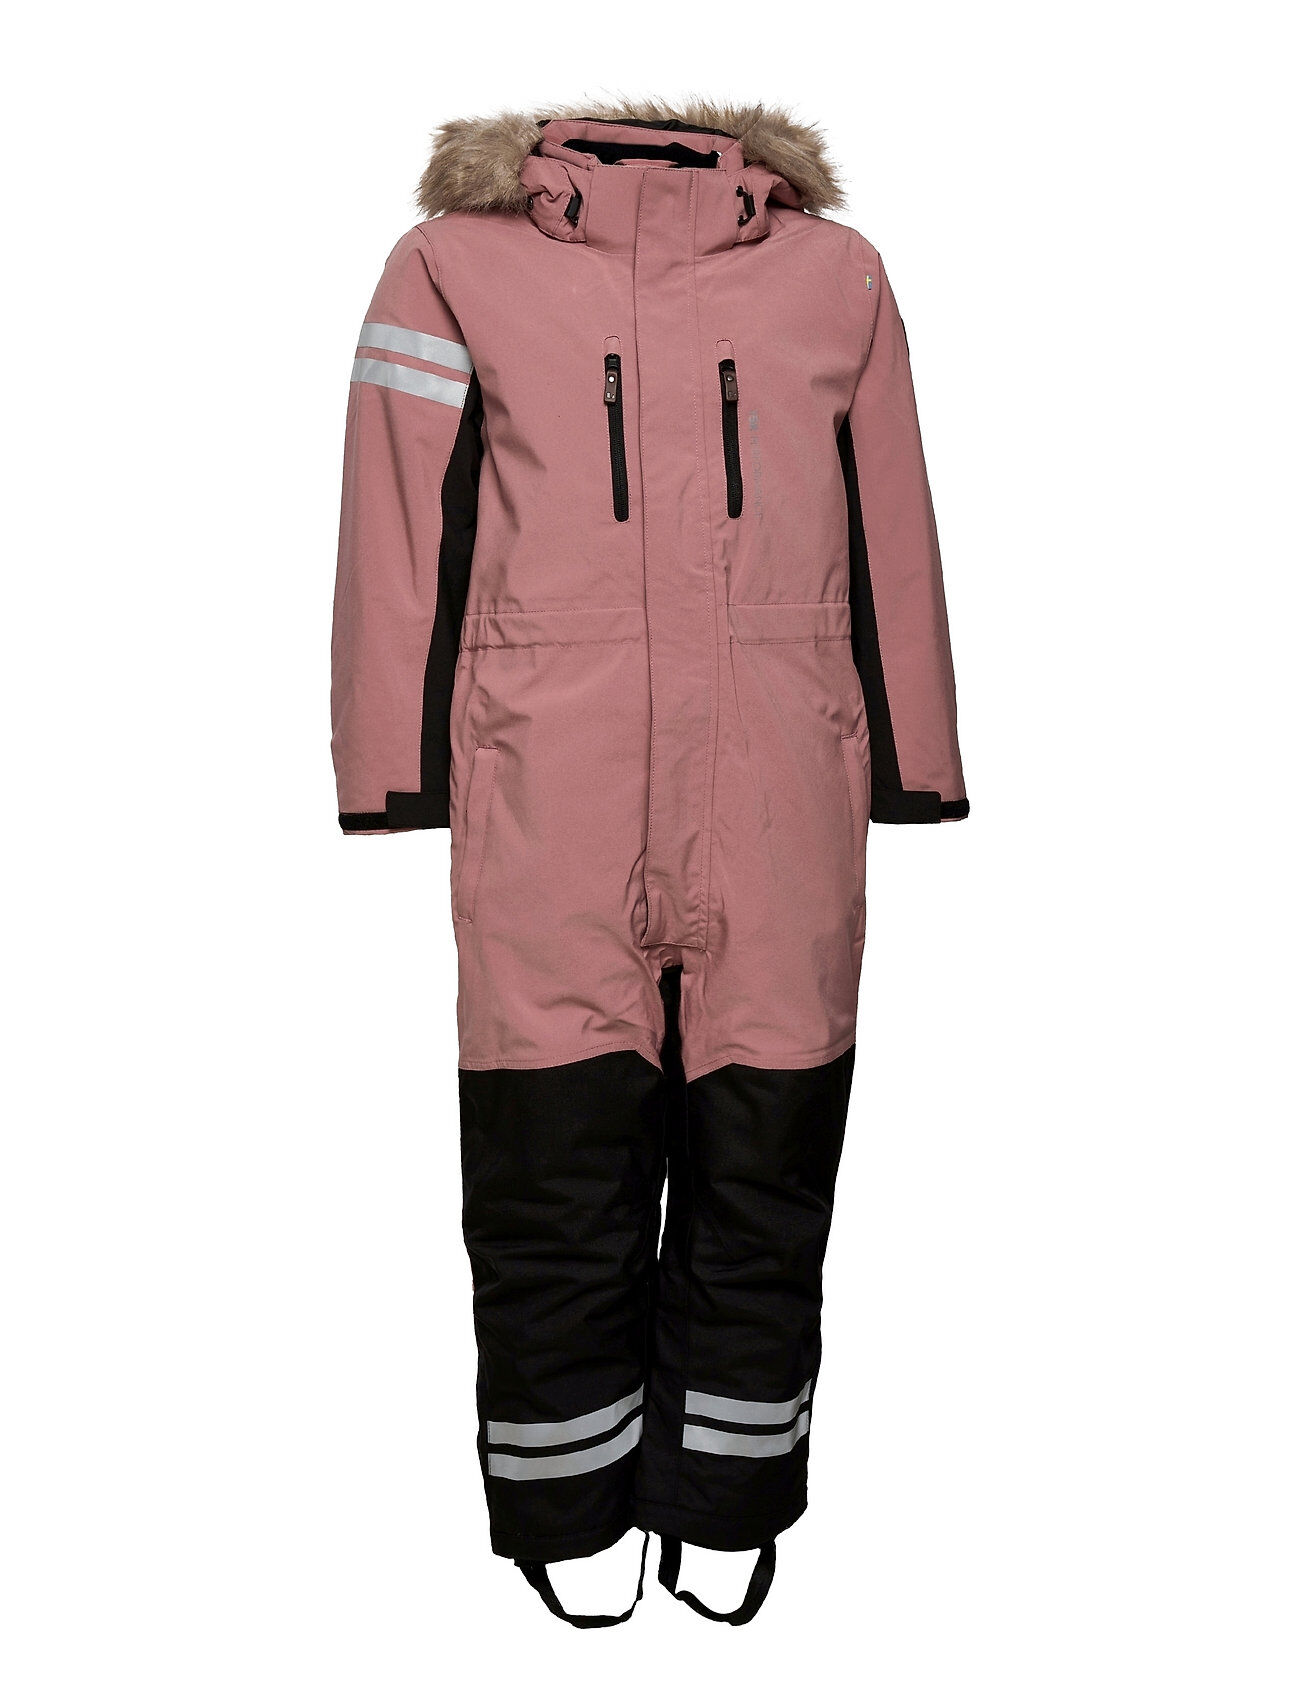 Lindberg Sweden Colden Overall Outerwear Coveralls Snow/ski Coveralls & Sets Rosa Lindberg Sweden